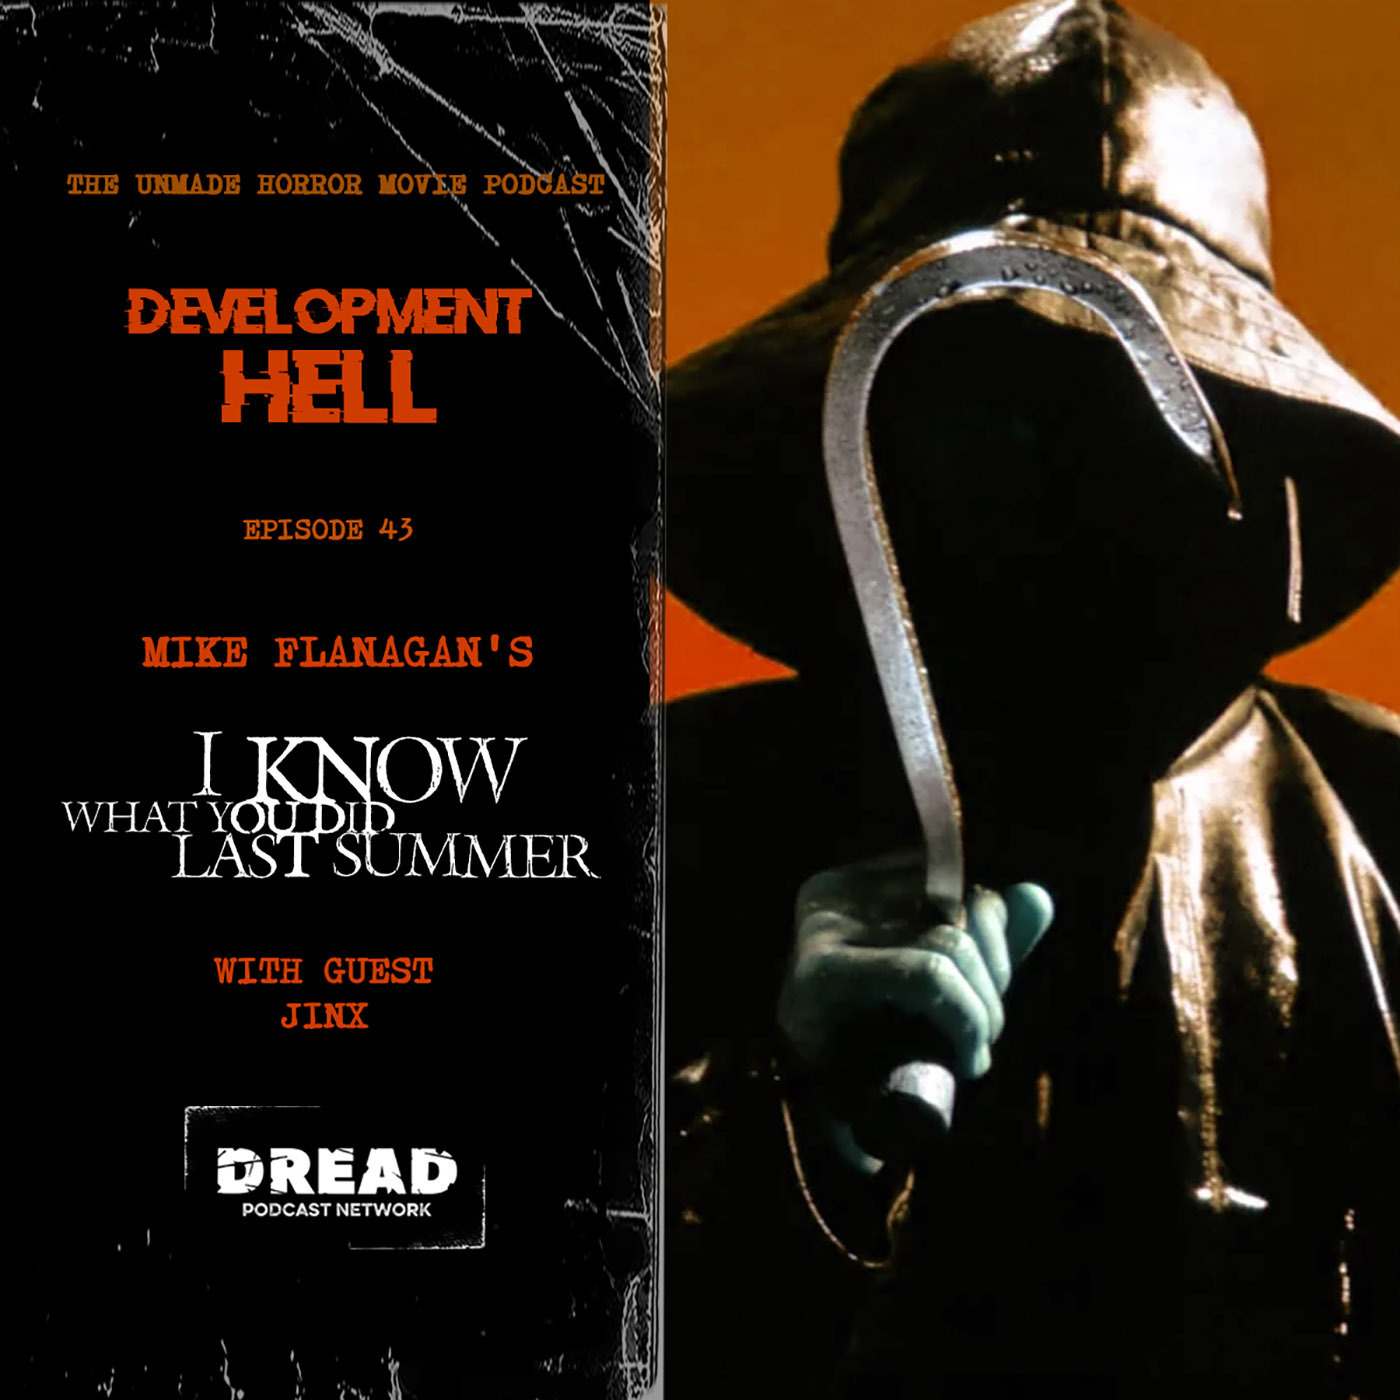 Mike Flanagan’s I KNOW WHAT YOU DID LAST SUMMER Reboot (with Jinx)